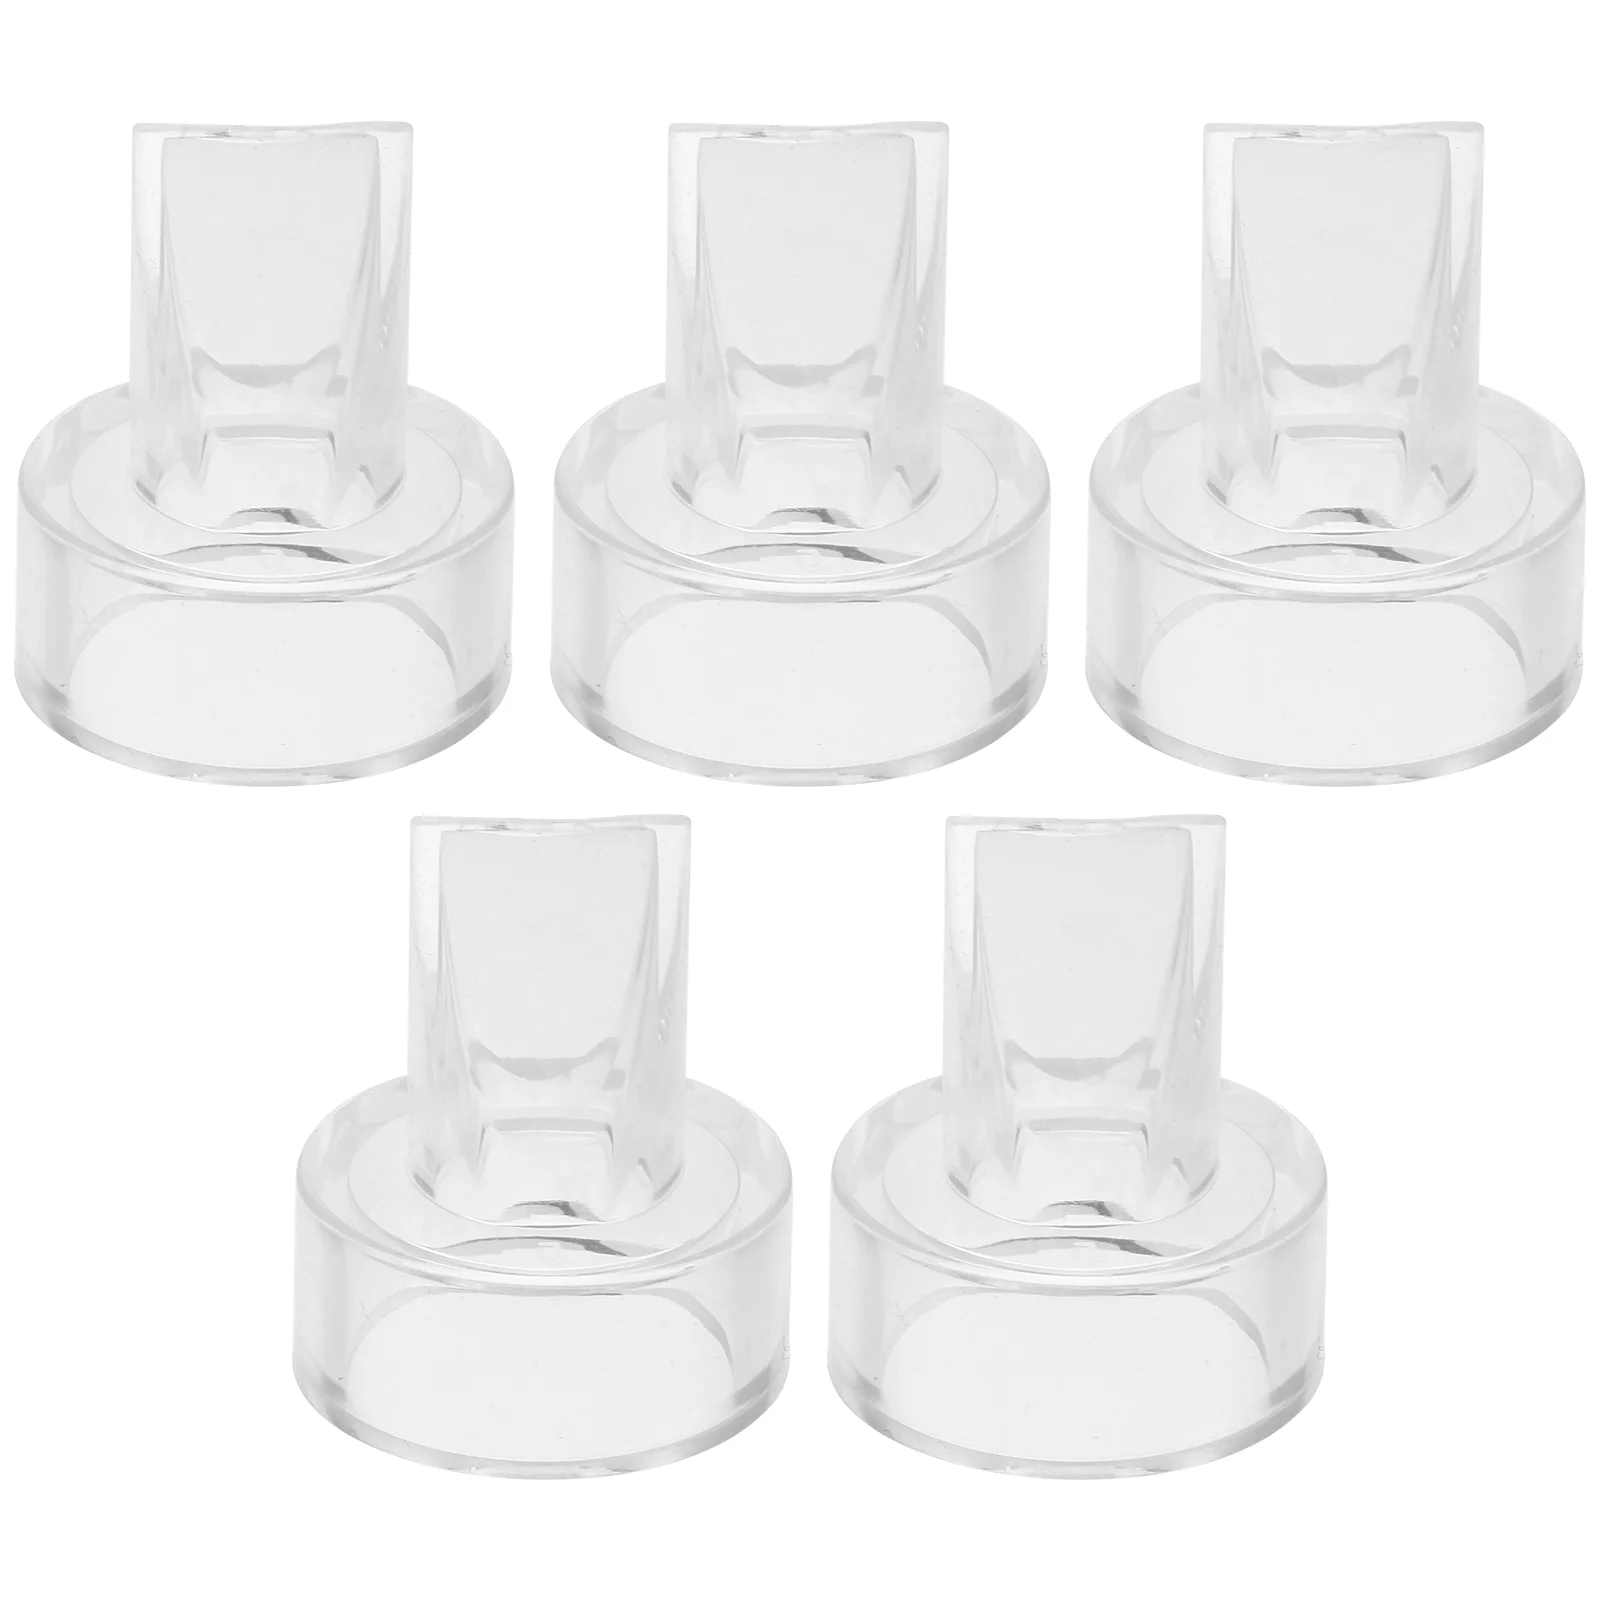 

5 Pcs Duckbill Valve Manual Breast Pump Parts Massagers Electric Women Anti Backflow Valves Accessories Pumps Silicone